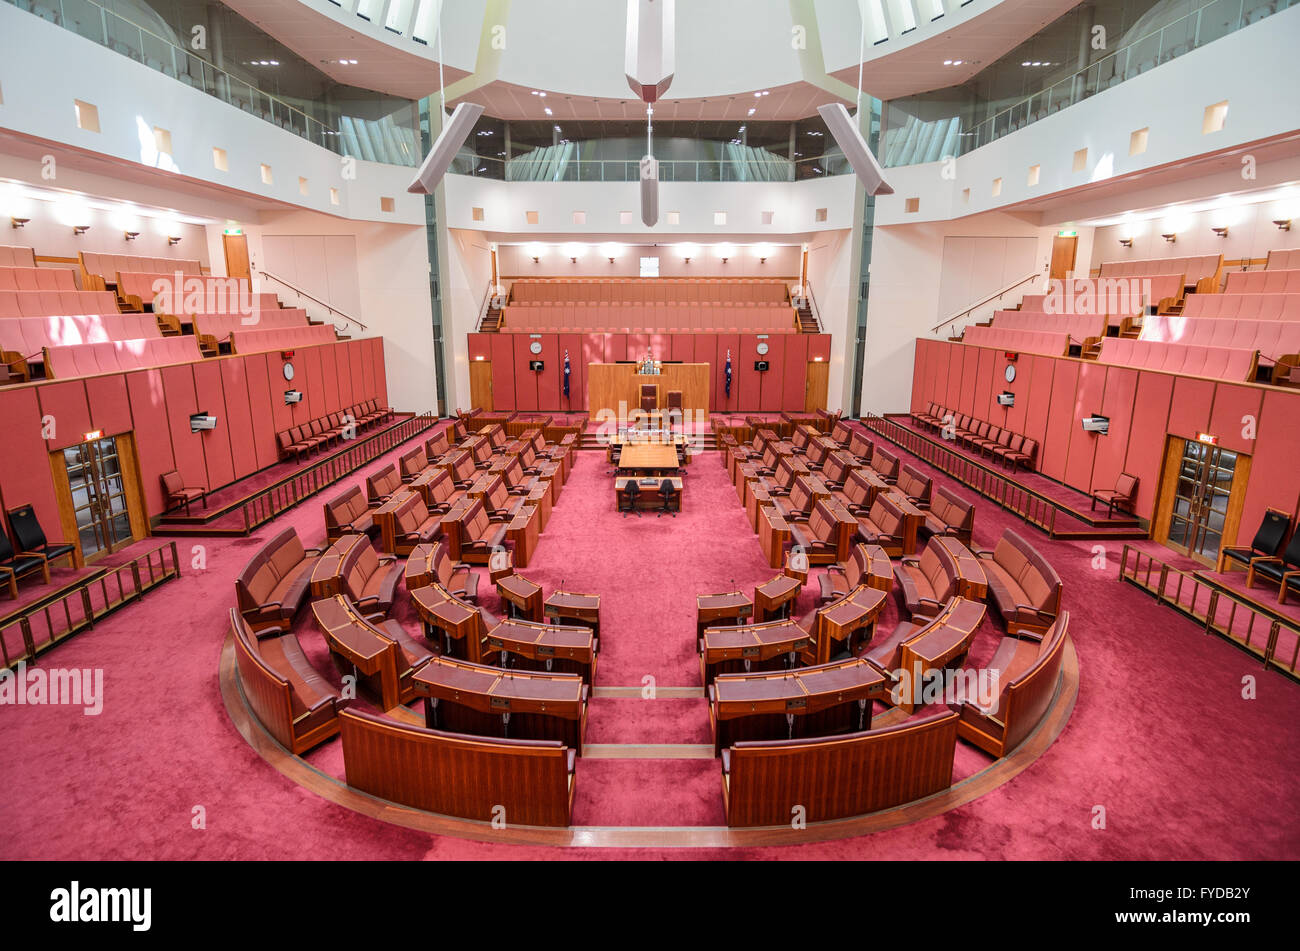 Inside the Parliament Building in Canberra, Australia Stock Photo